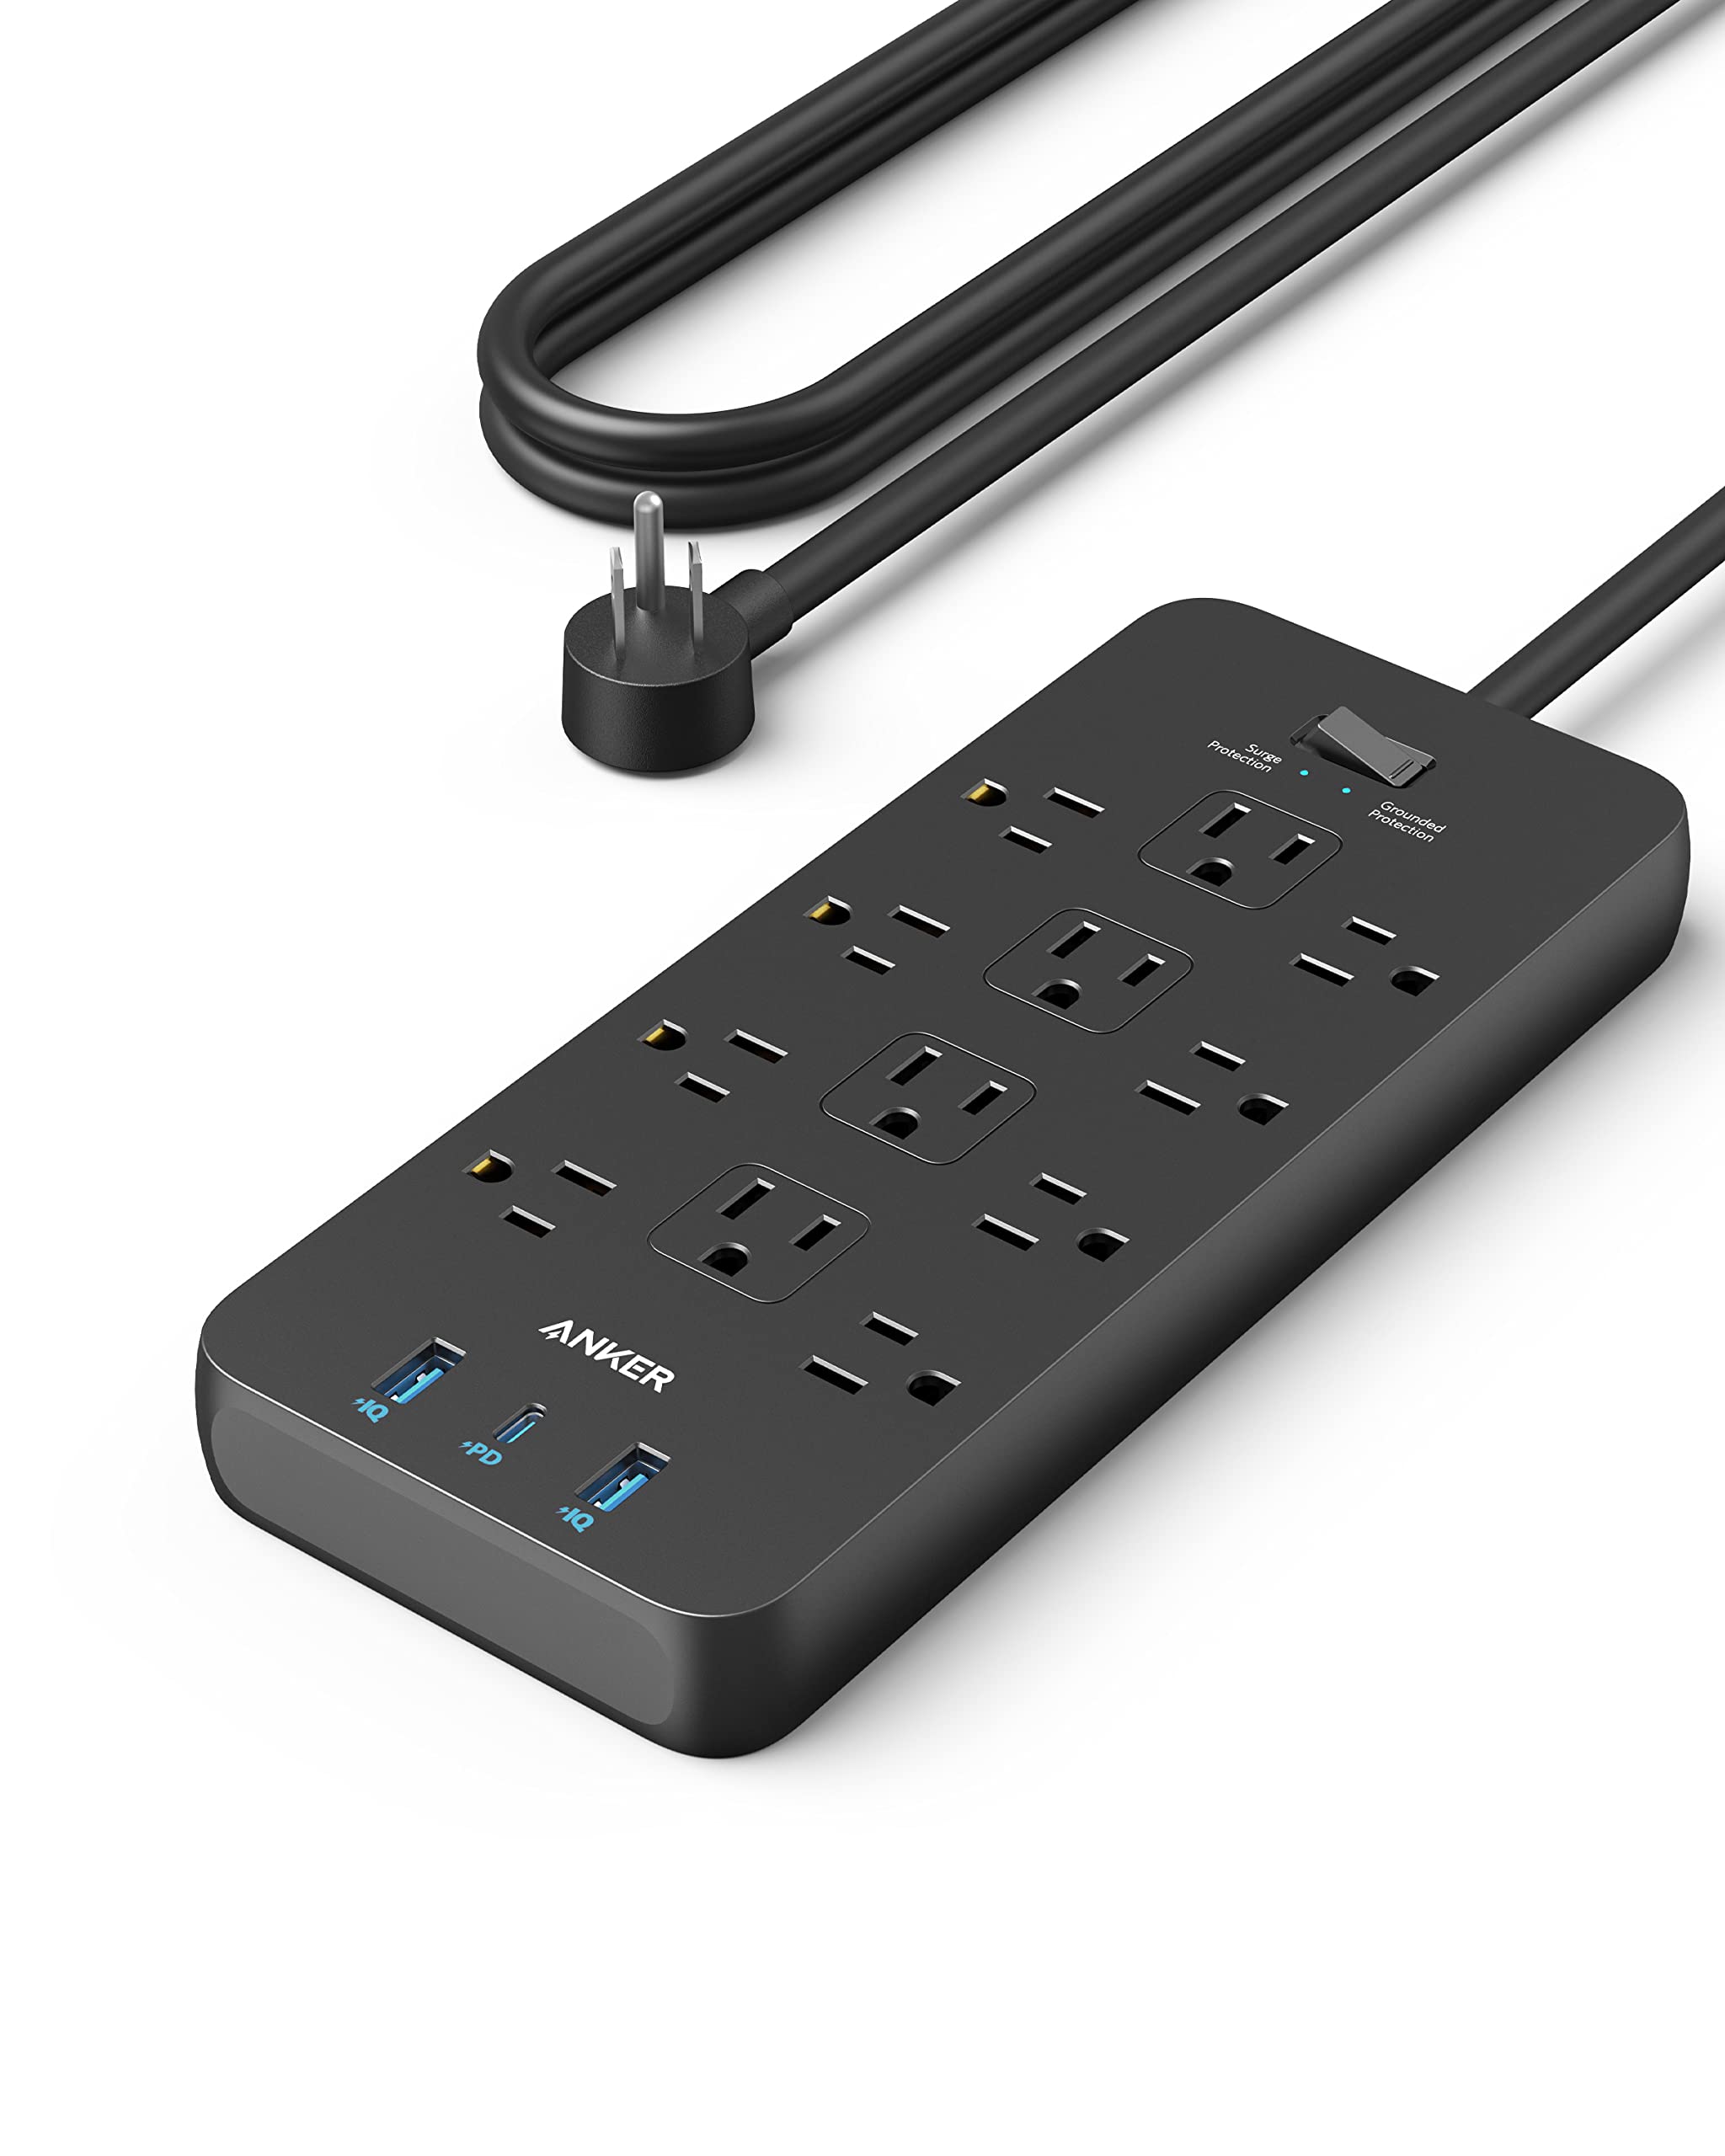 5' Anker Power Strip 2100J 12-Outlet Surge Protector w/ 2x USB A + 1 USB C Port (Black) $22 + Free Shipping w/ Prime or on $35+